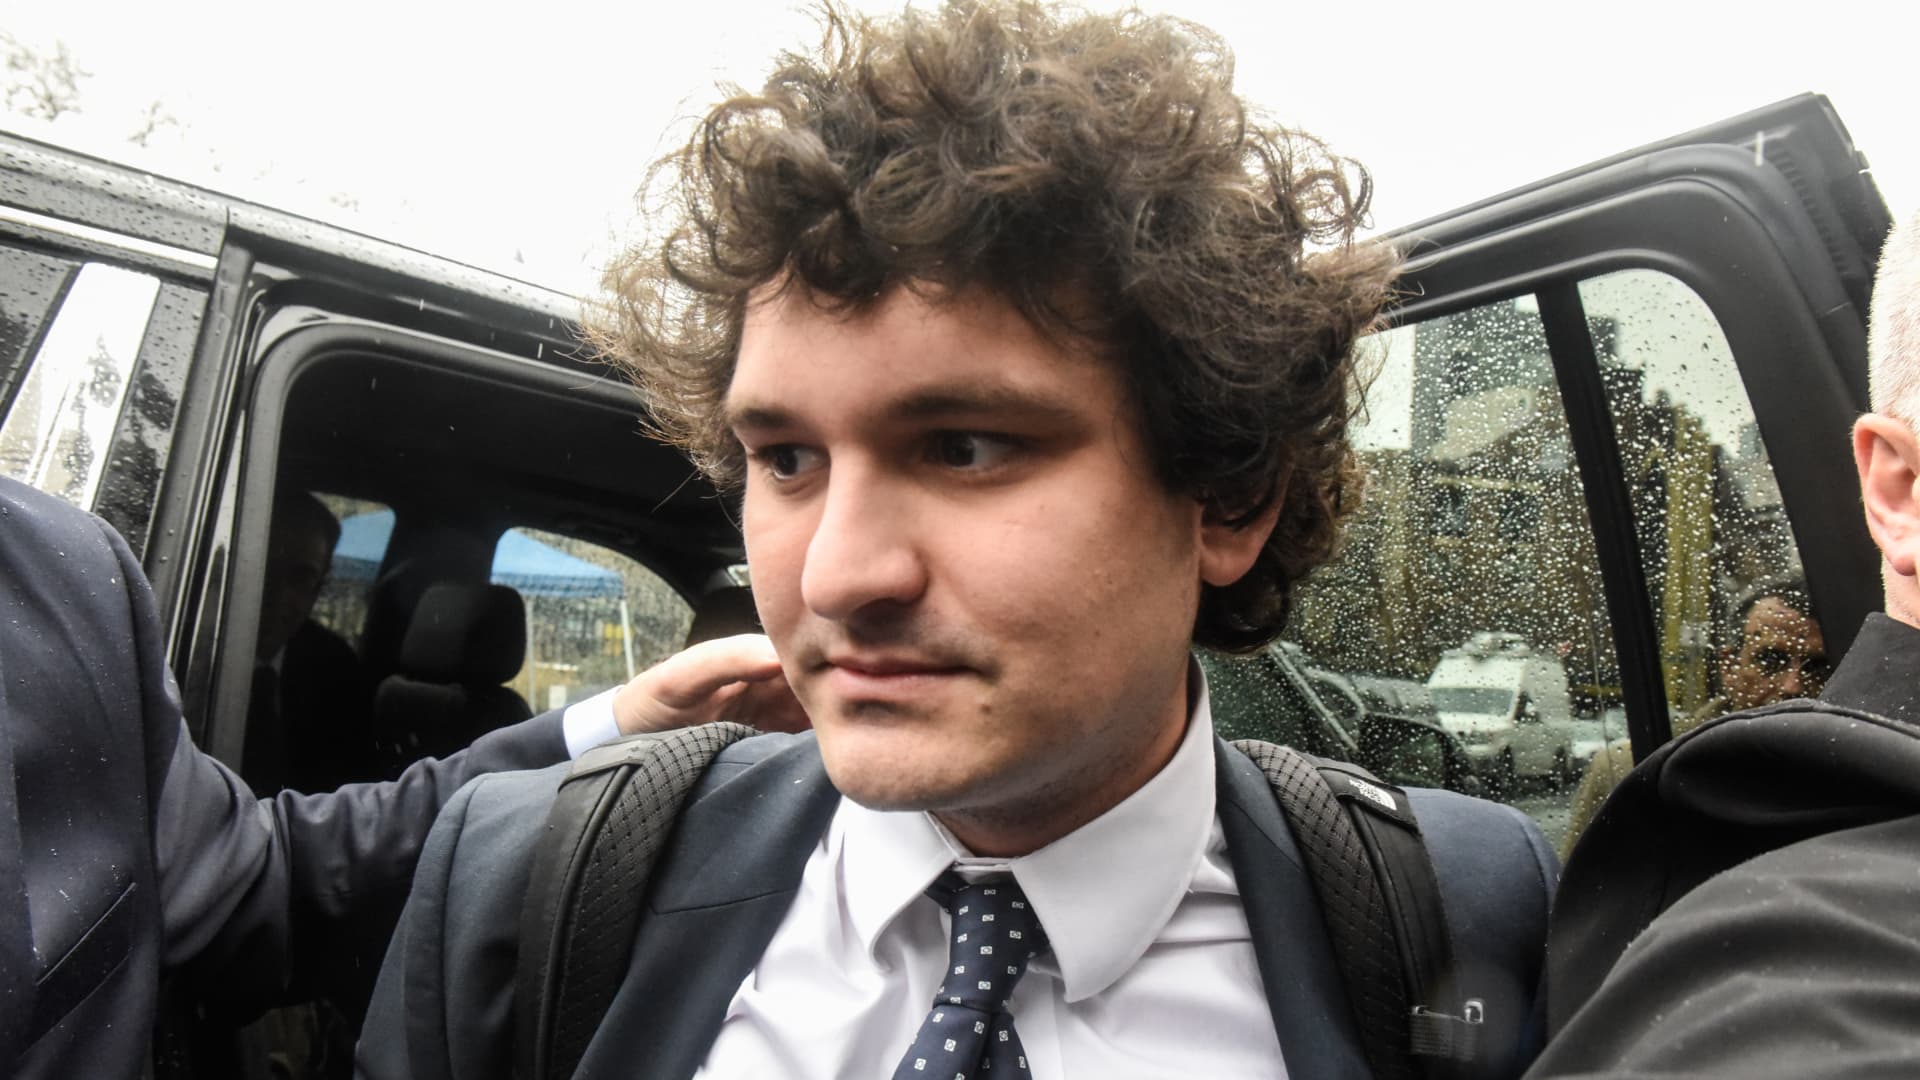 Live Updates: FTX founder Sam Bankman-Fried sentencing in New York federal court